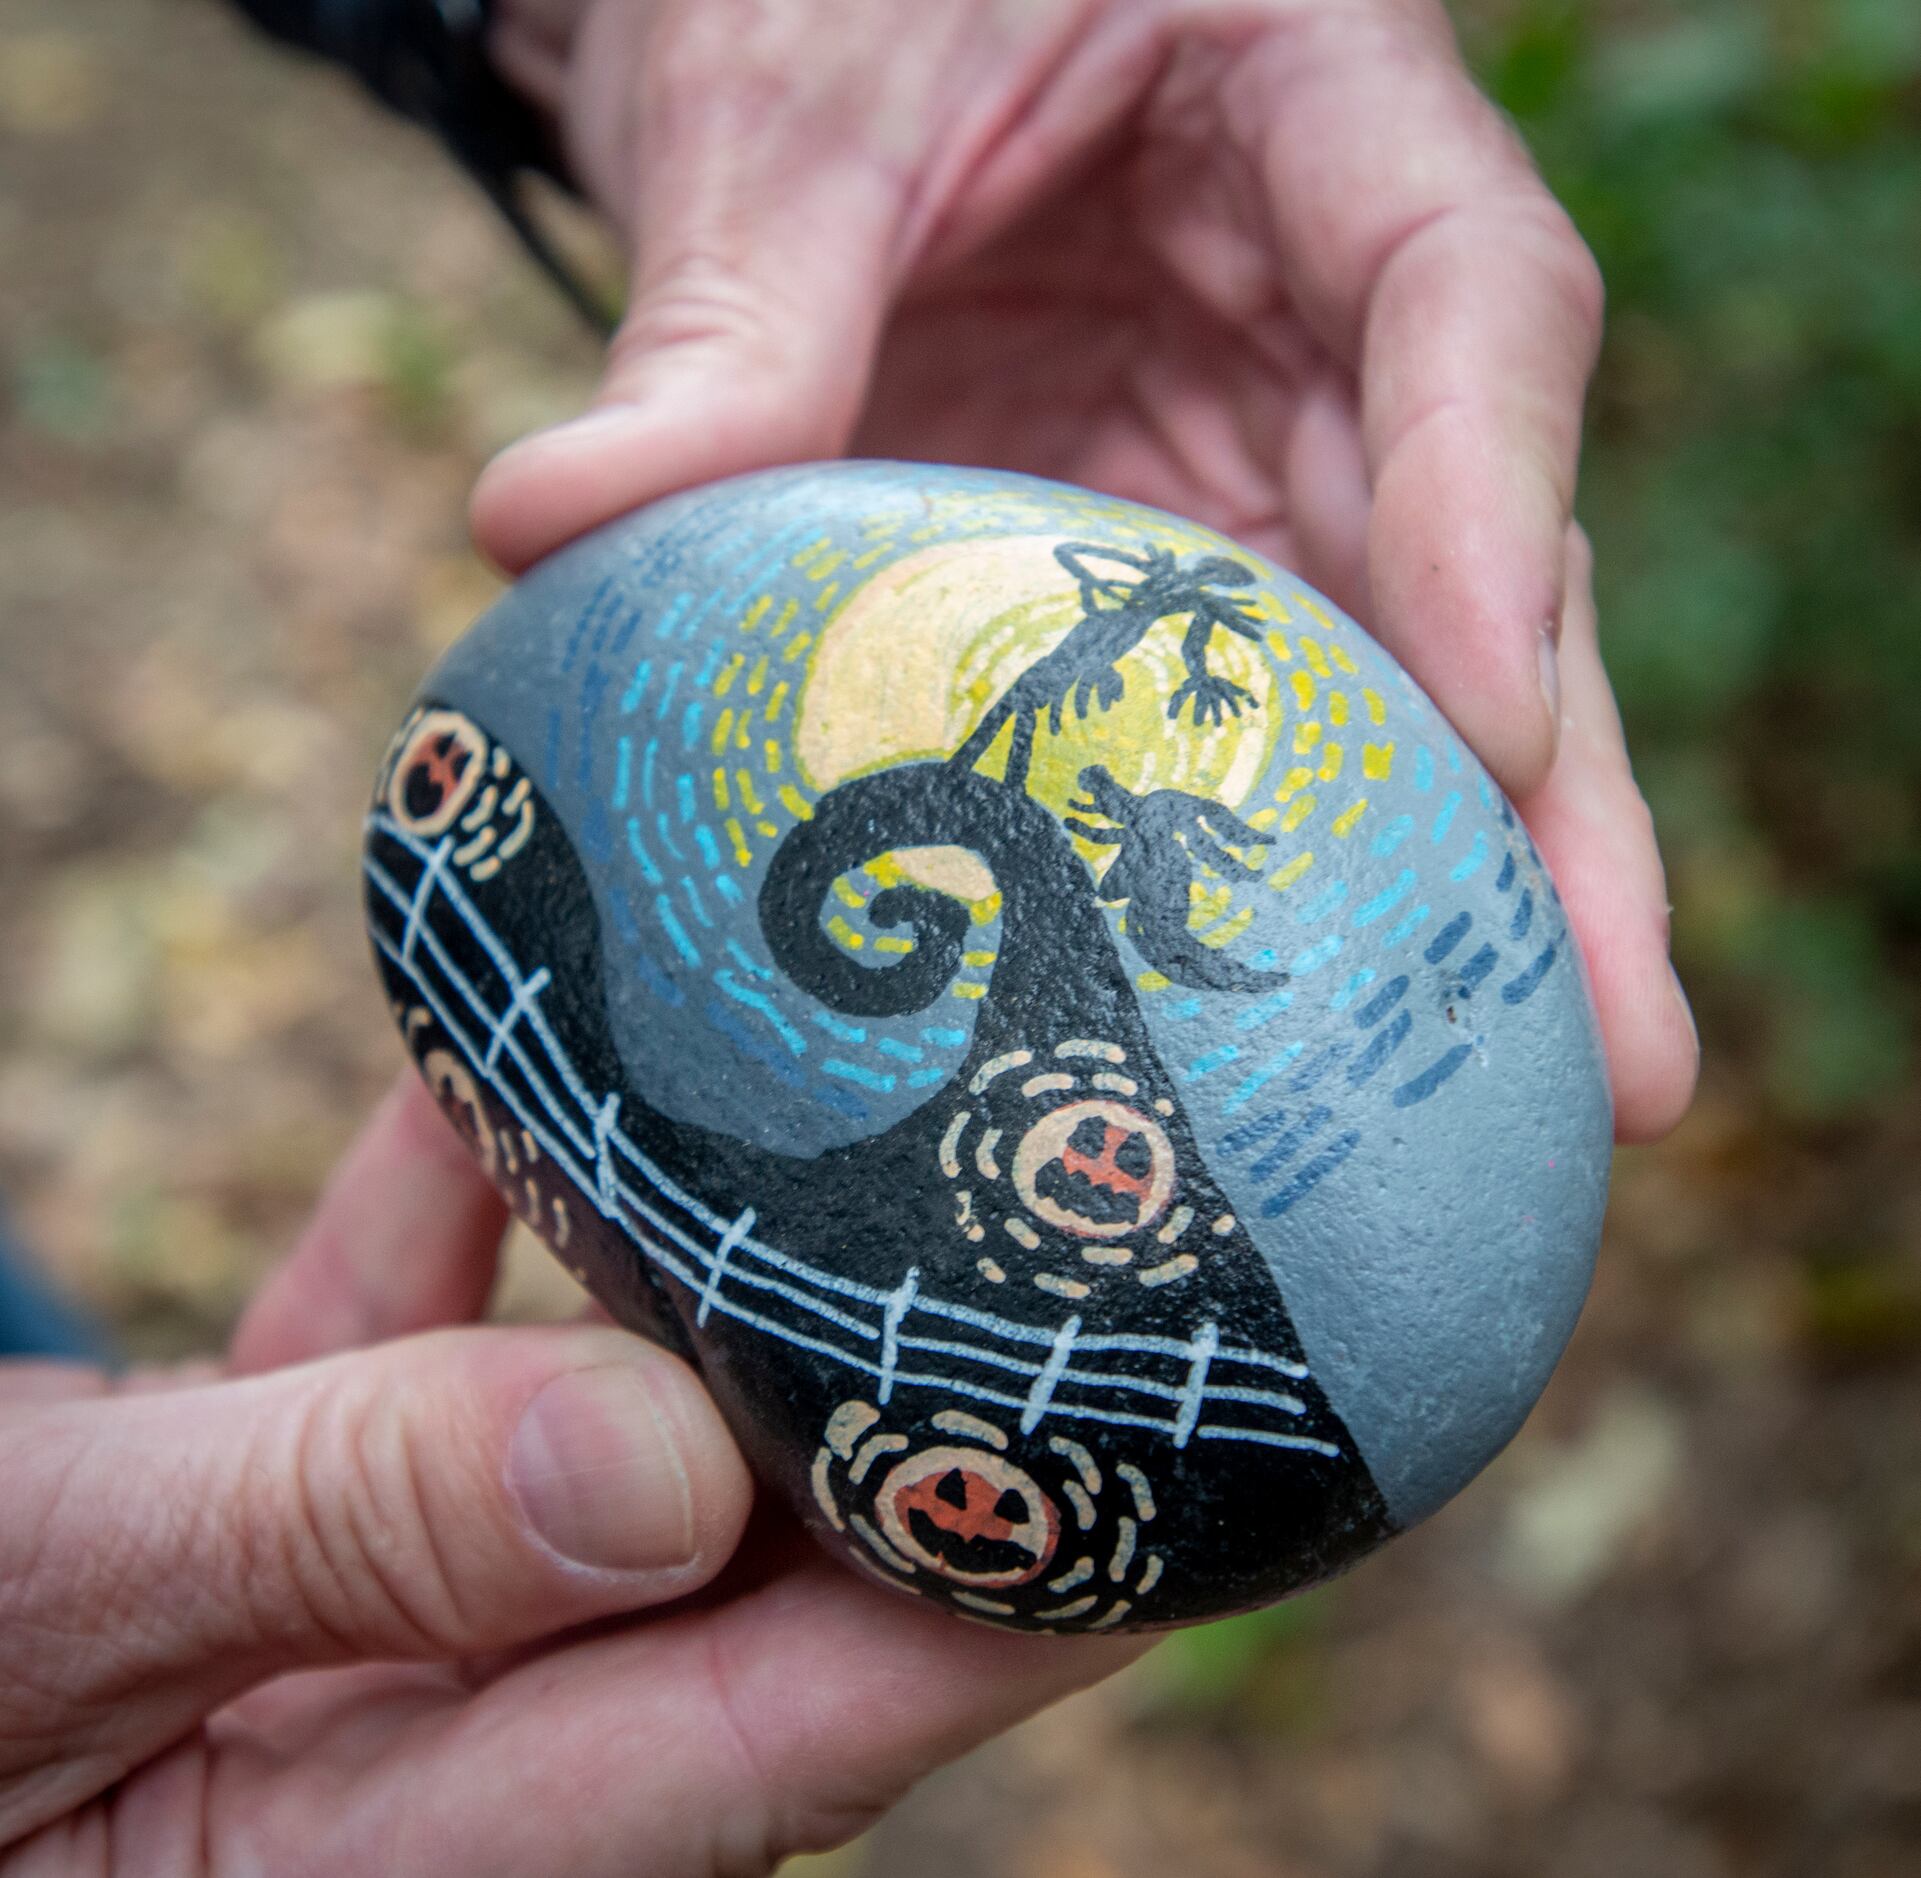 Ron Olsen, who launched the rock art trail, holds one of the hudereds of painted rocks at...